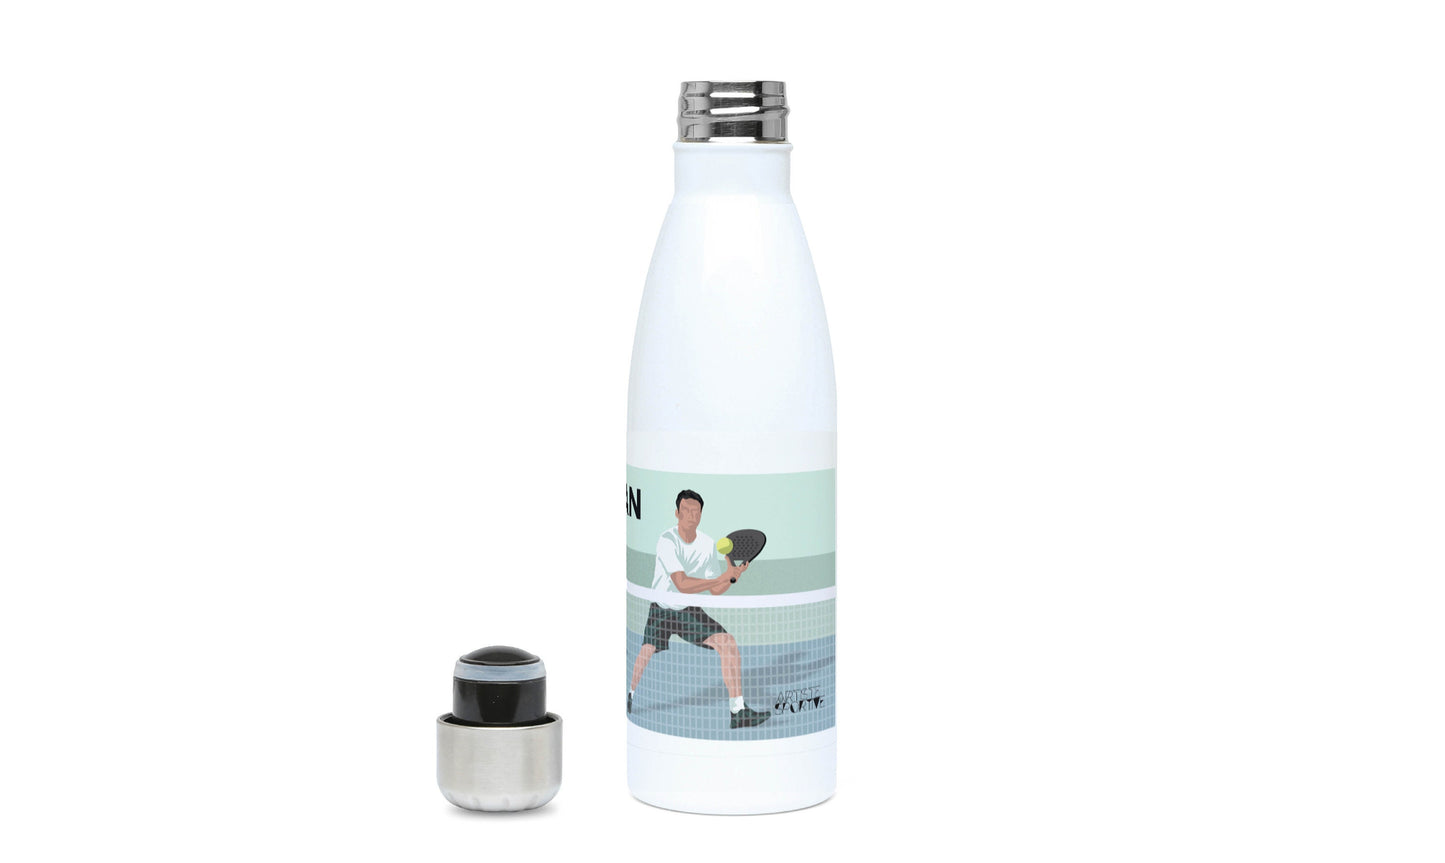 “Padel player” insulated bottle - customizable